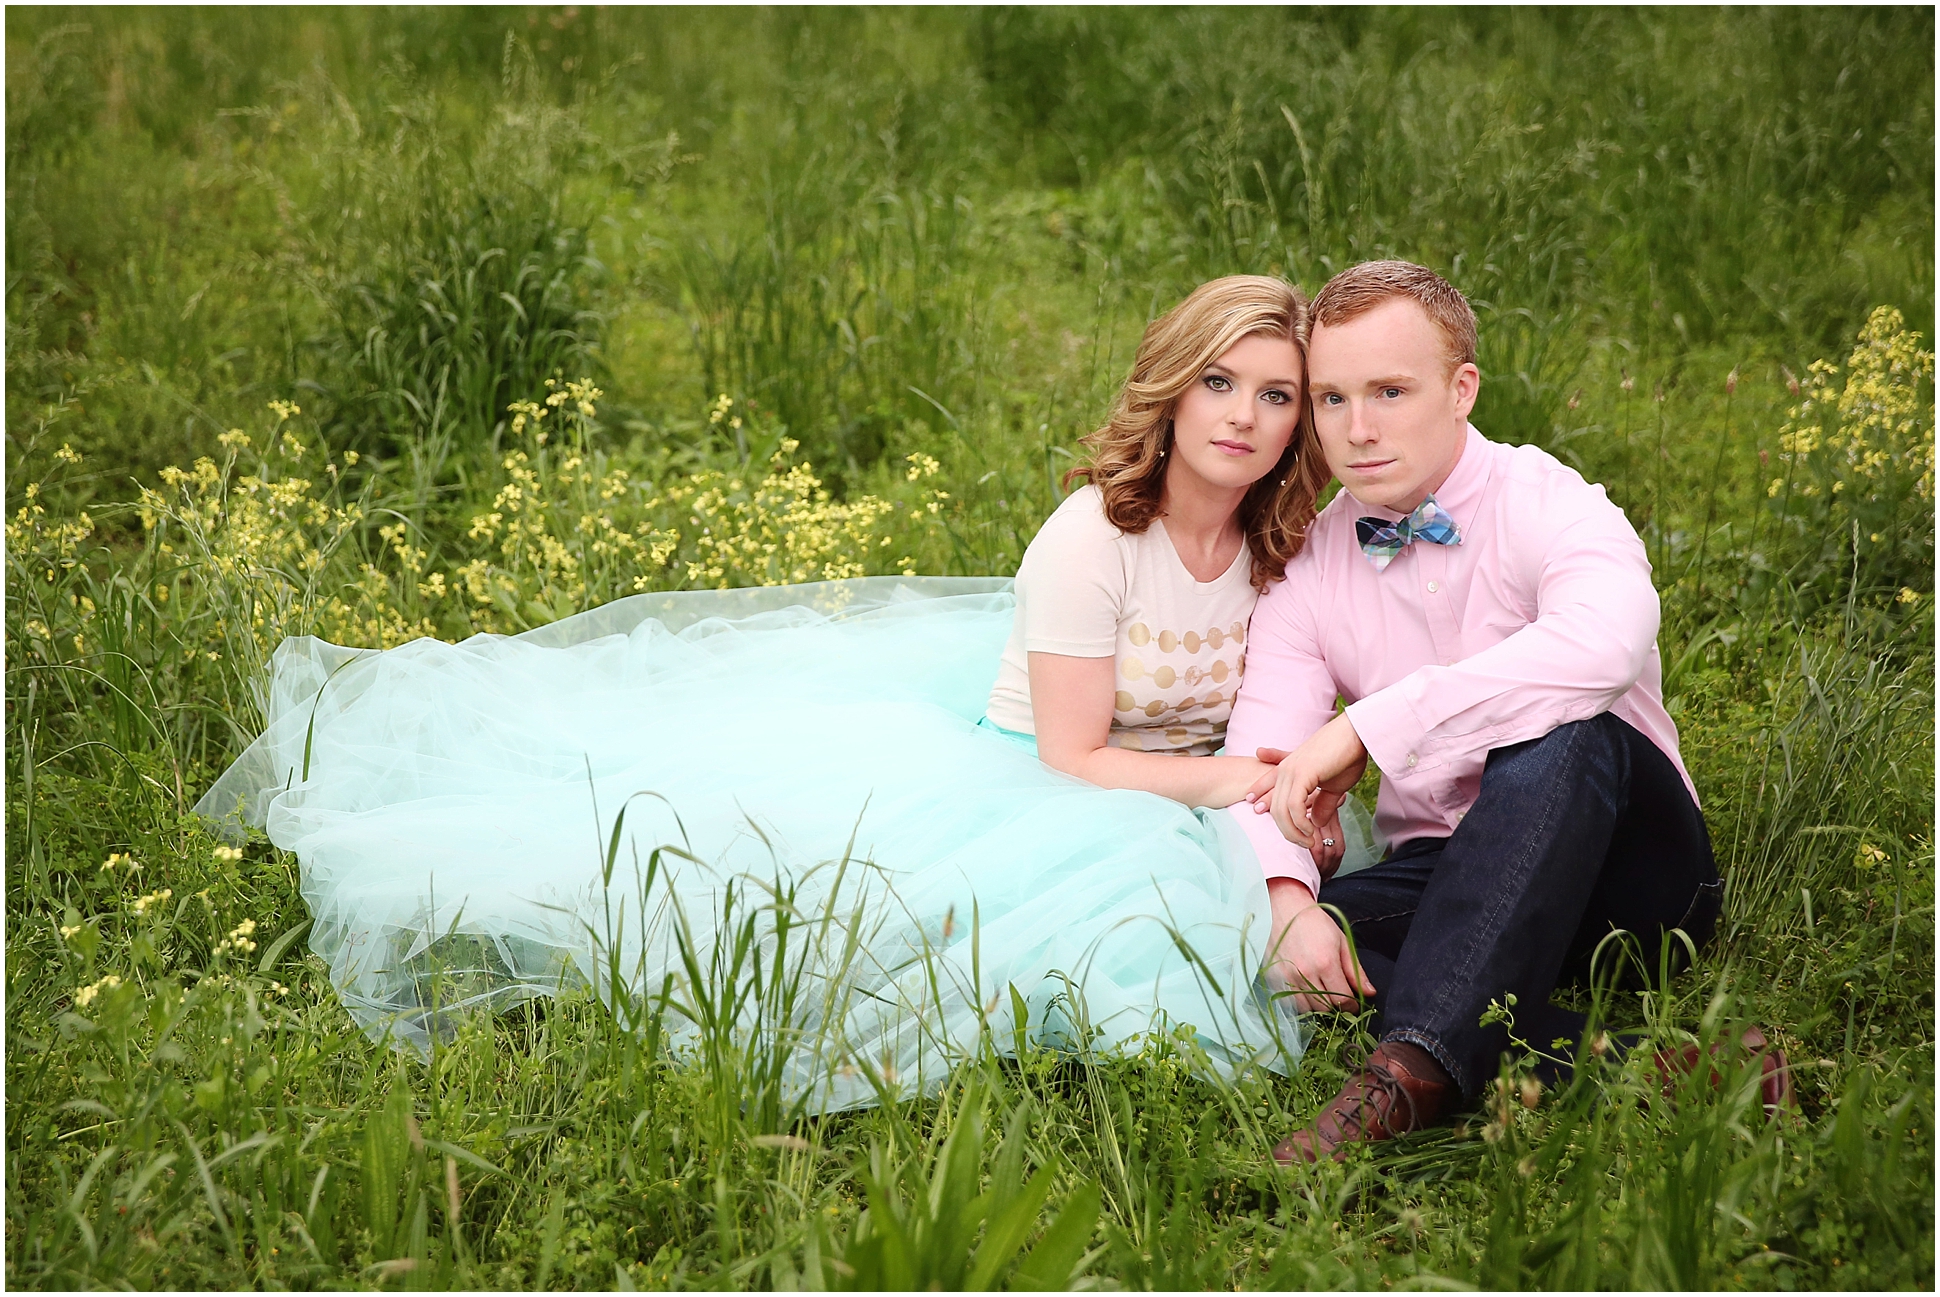 A Bowtie and Tulle Skirt Engagement Session | Two Chics Photography | www.twochicsphotography.com